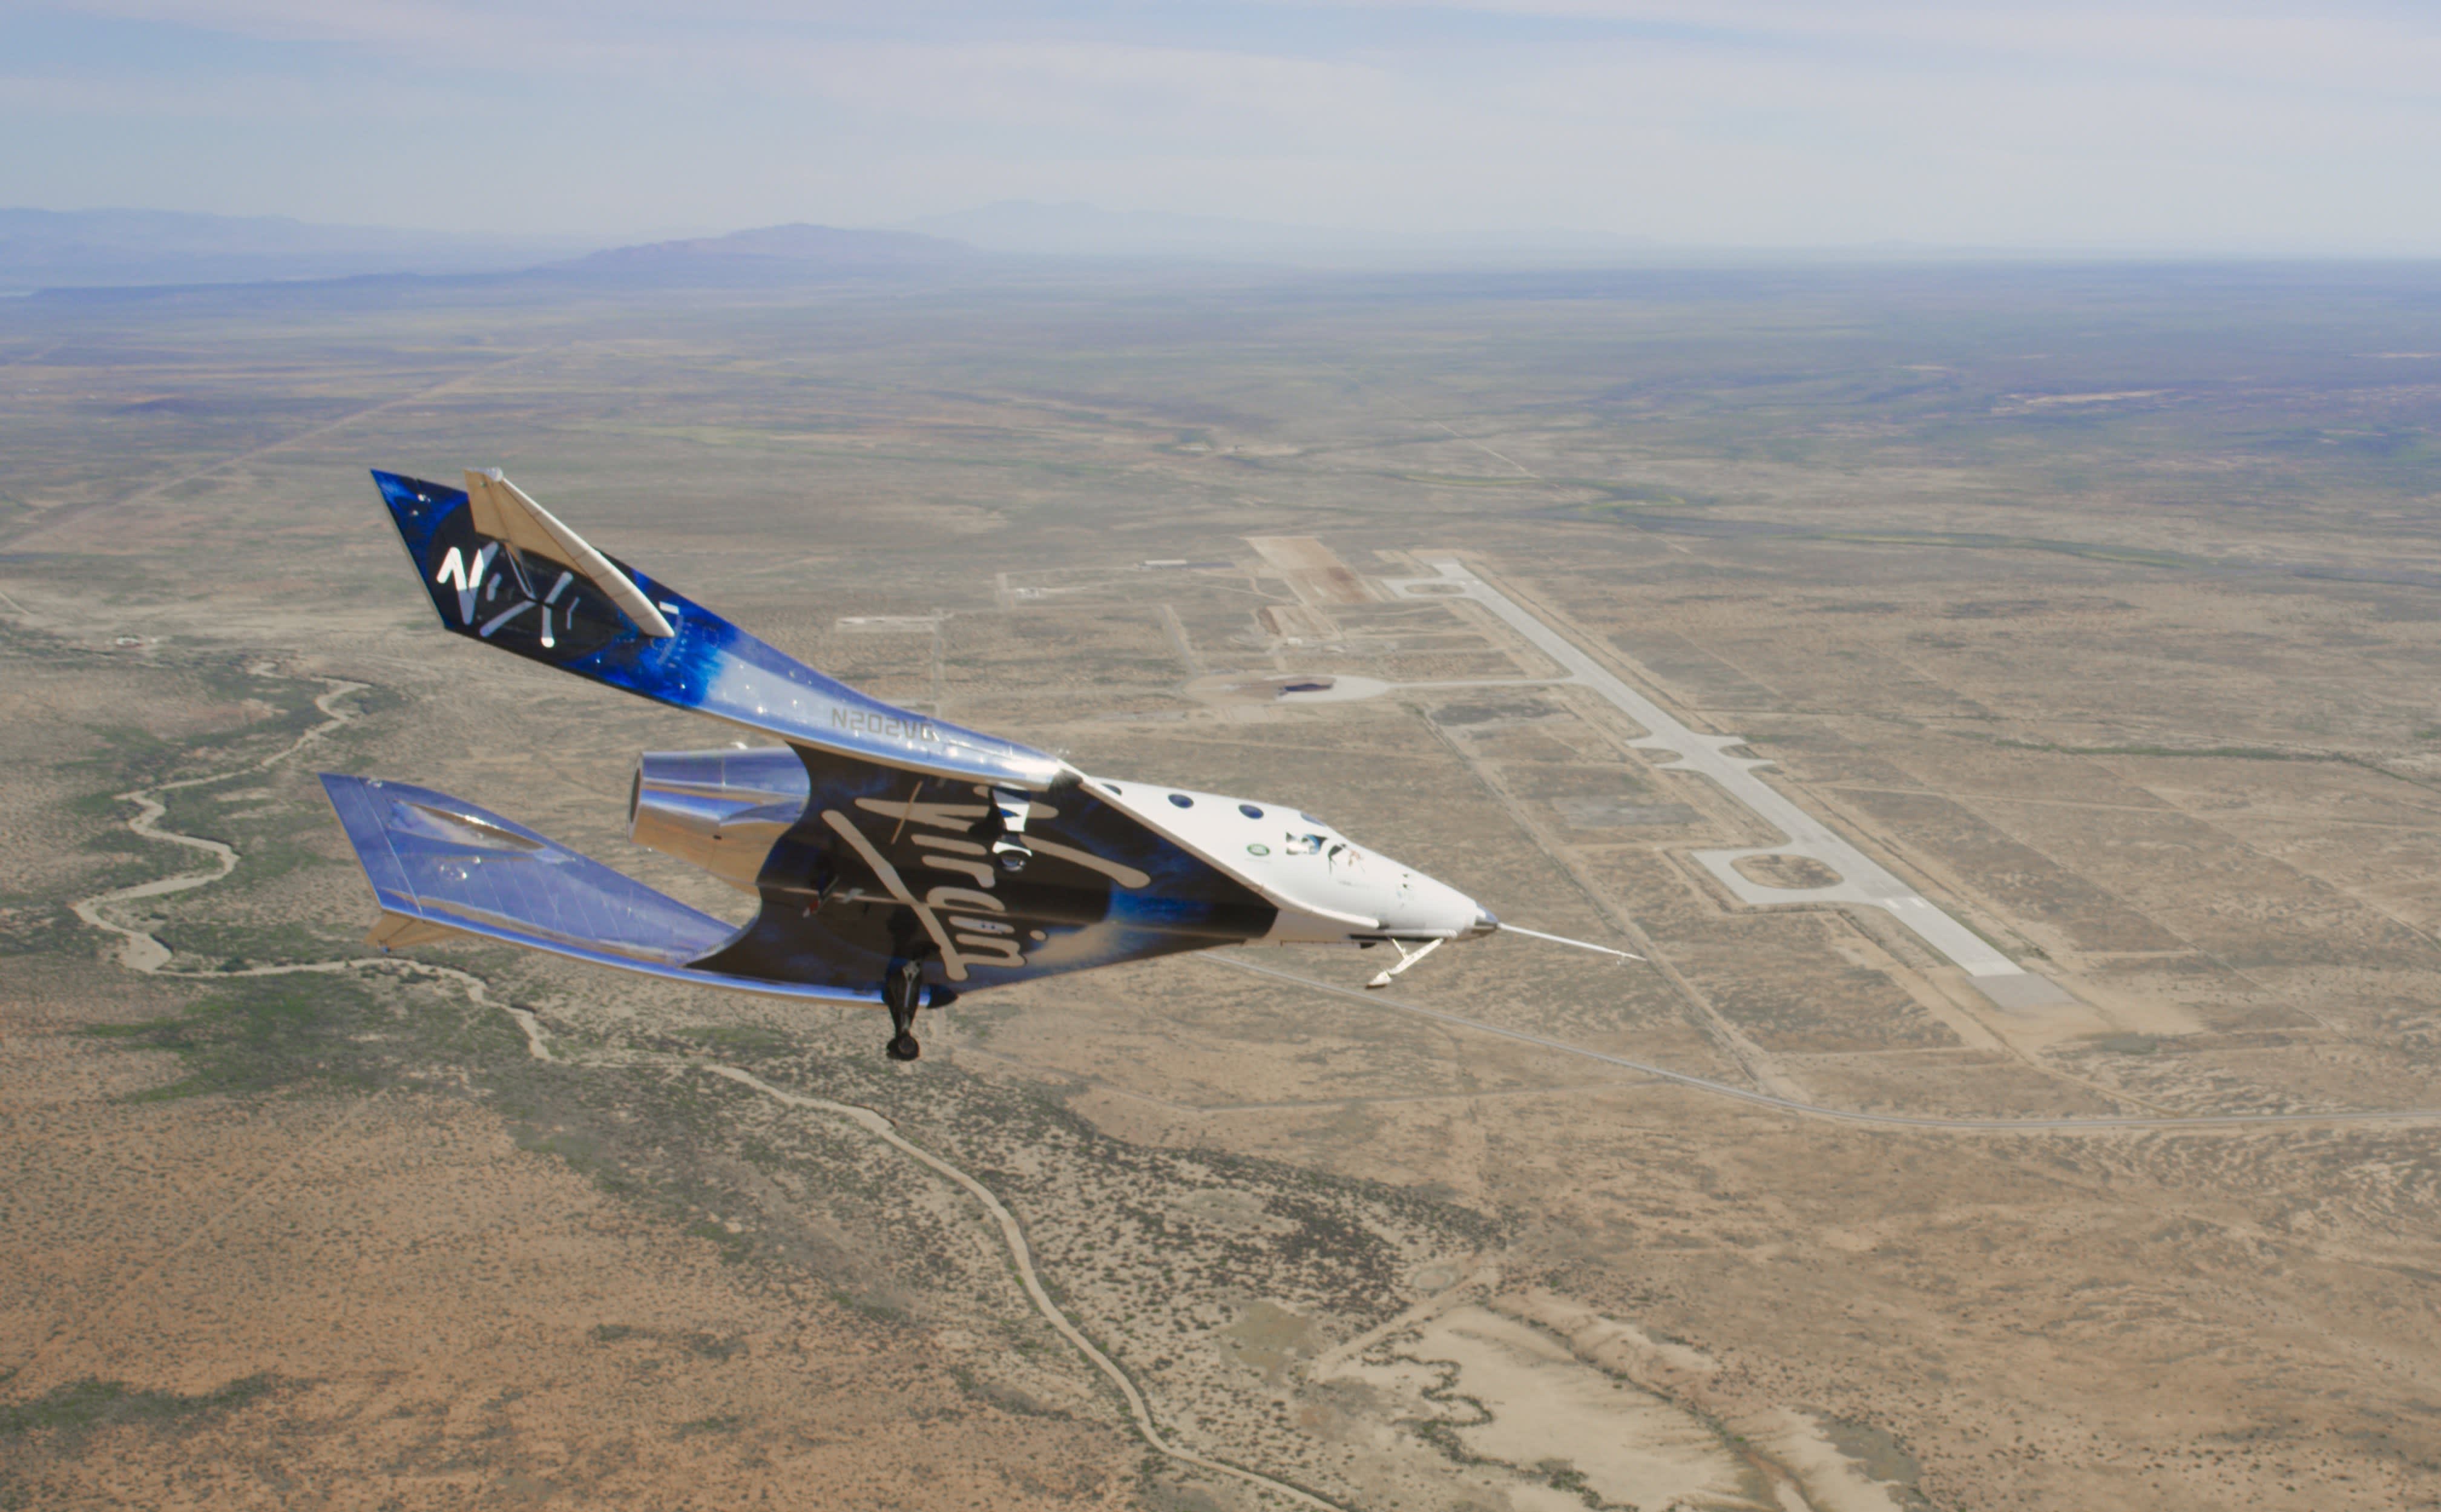 Virgin Galactic stock is down after Cathie Wood’s ARKX sale